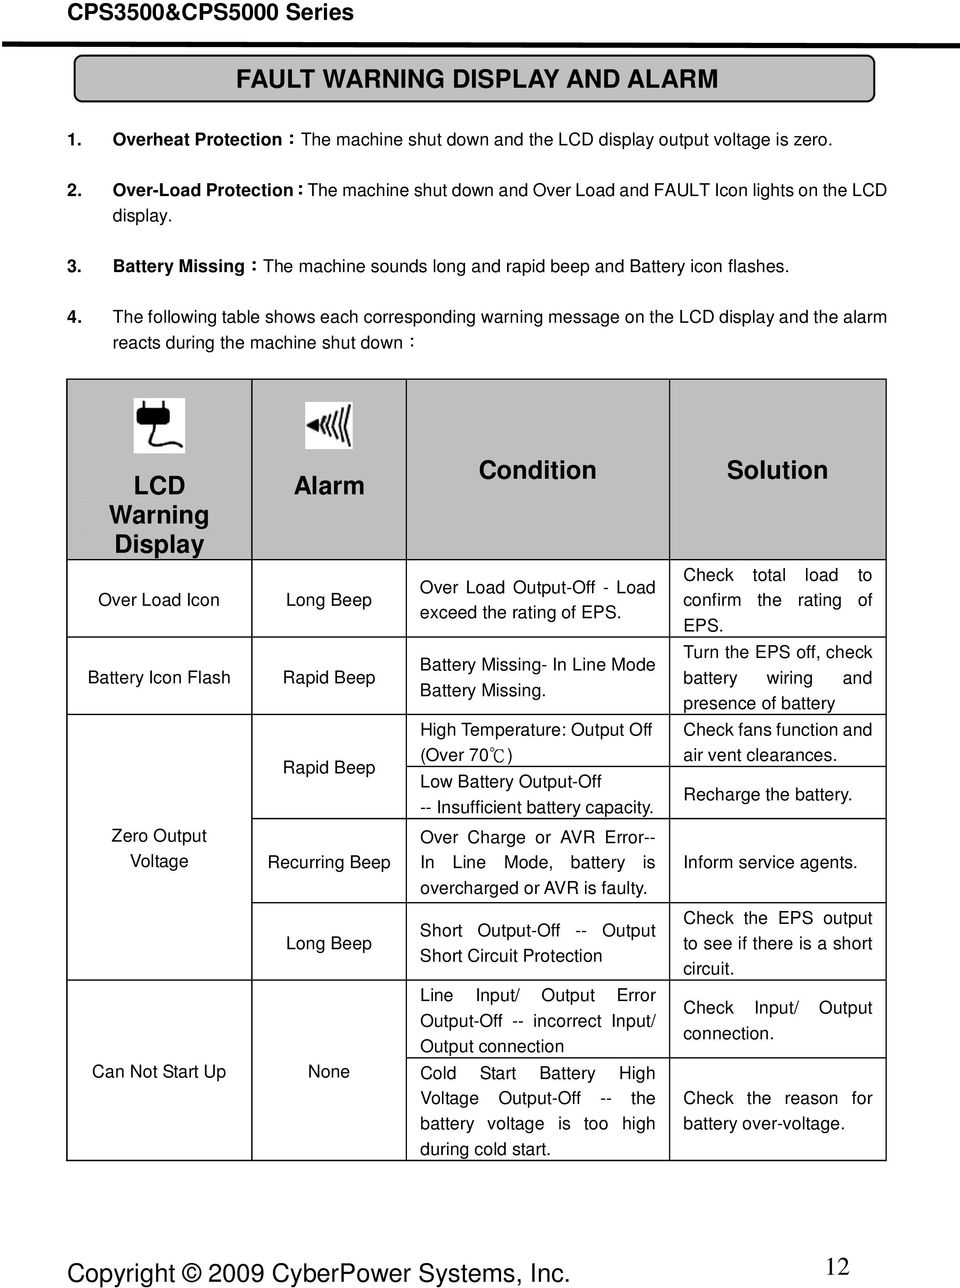 The following table shows each corresponding warning message on the LCD display and the alarm reacts during the machine shut down: LCD Warning Display Alarm Condition Solution Over Load Icon Long